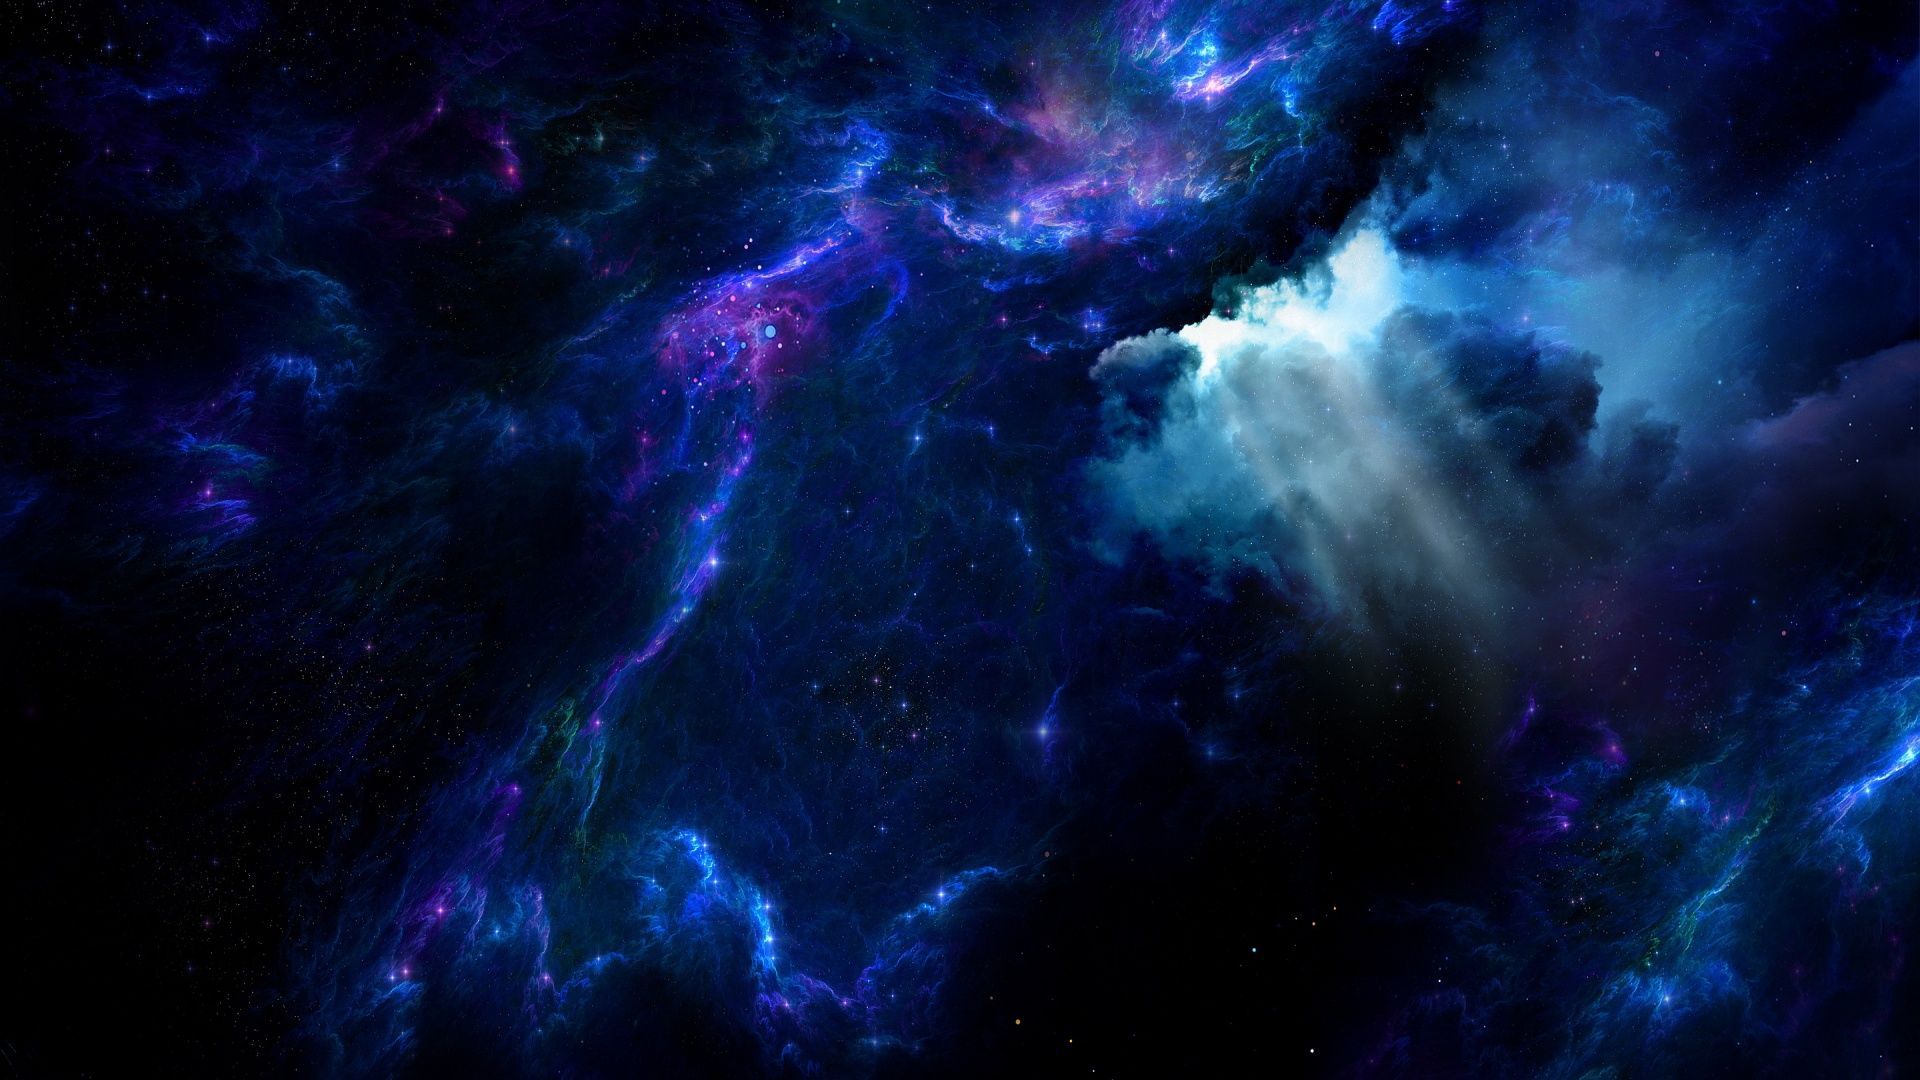 Space Hd Wallpapers 1920x1080 - Pics about space